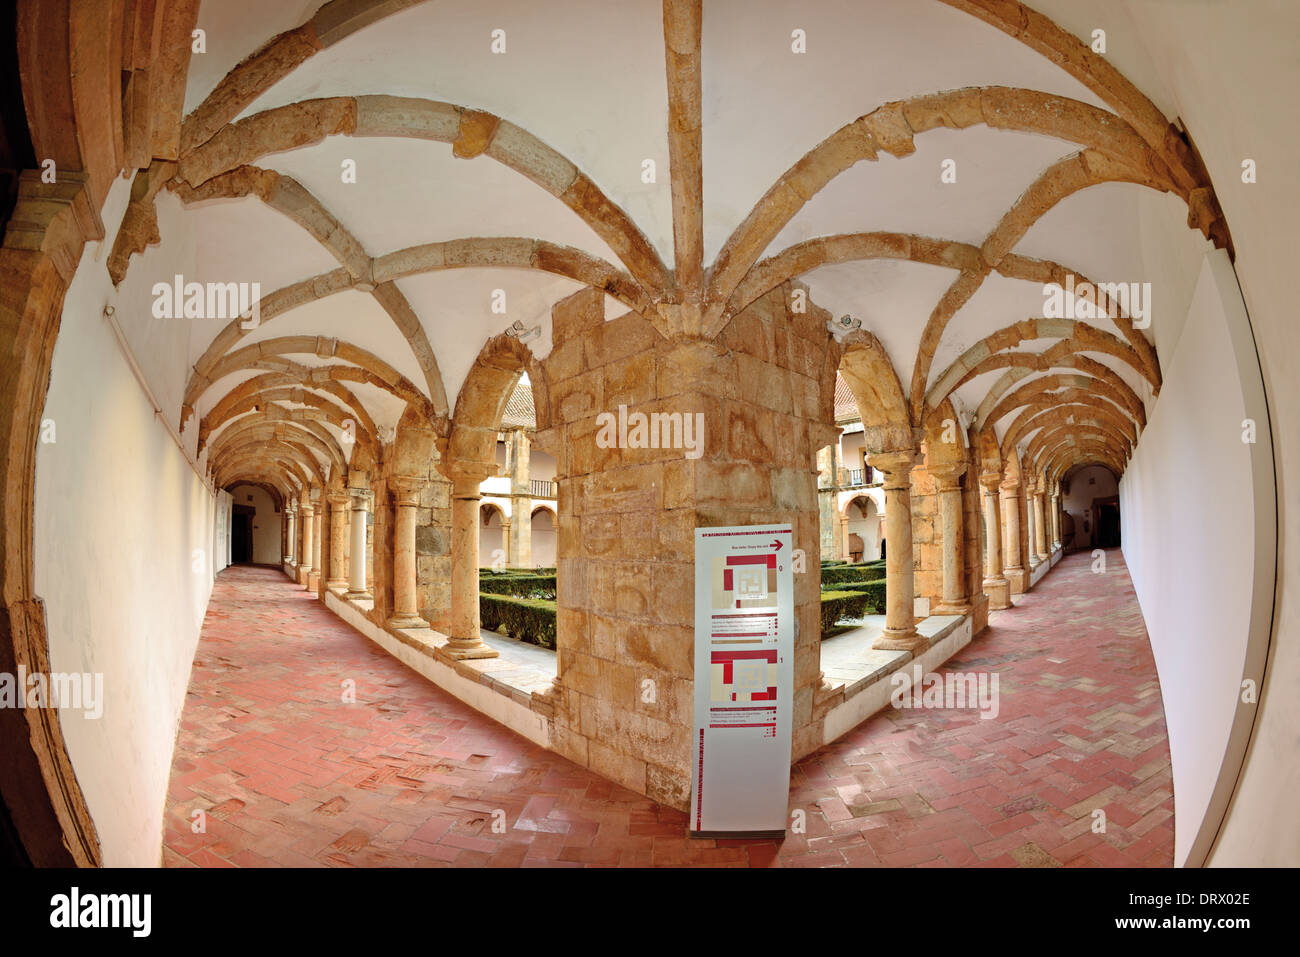 Portugal, Algarve: Medieval cloister in the City Museum of Faro Stock Photo